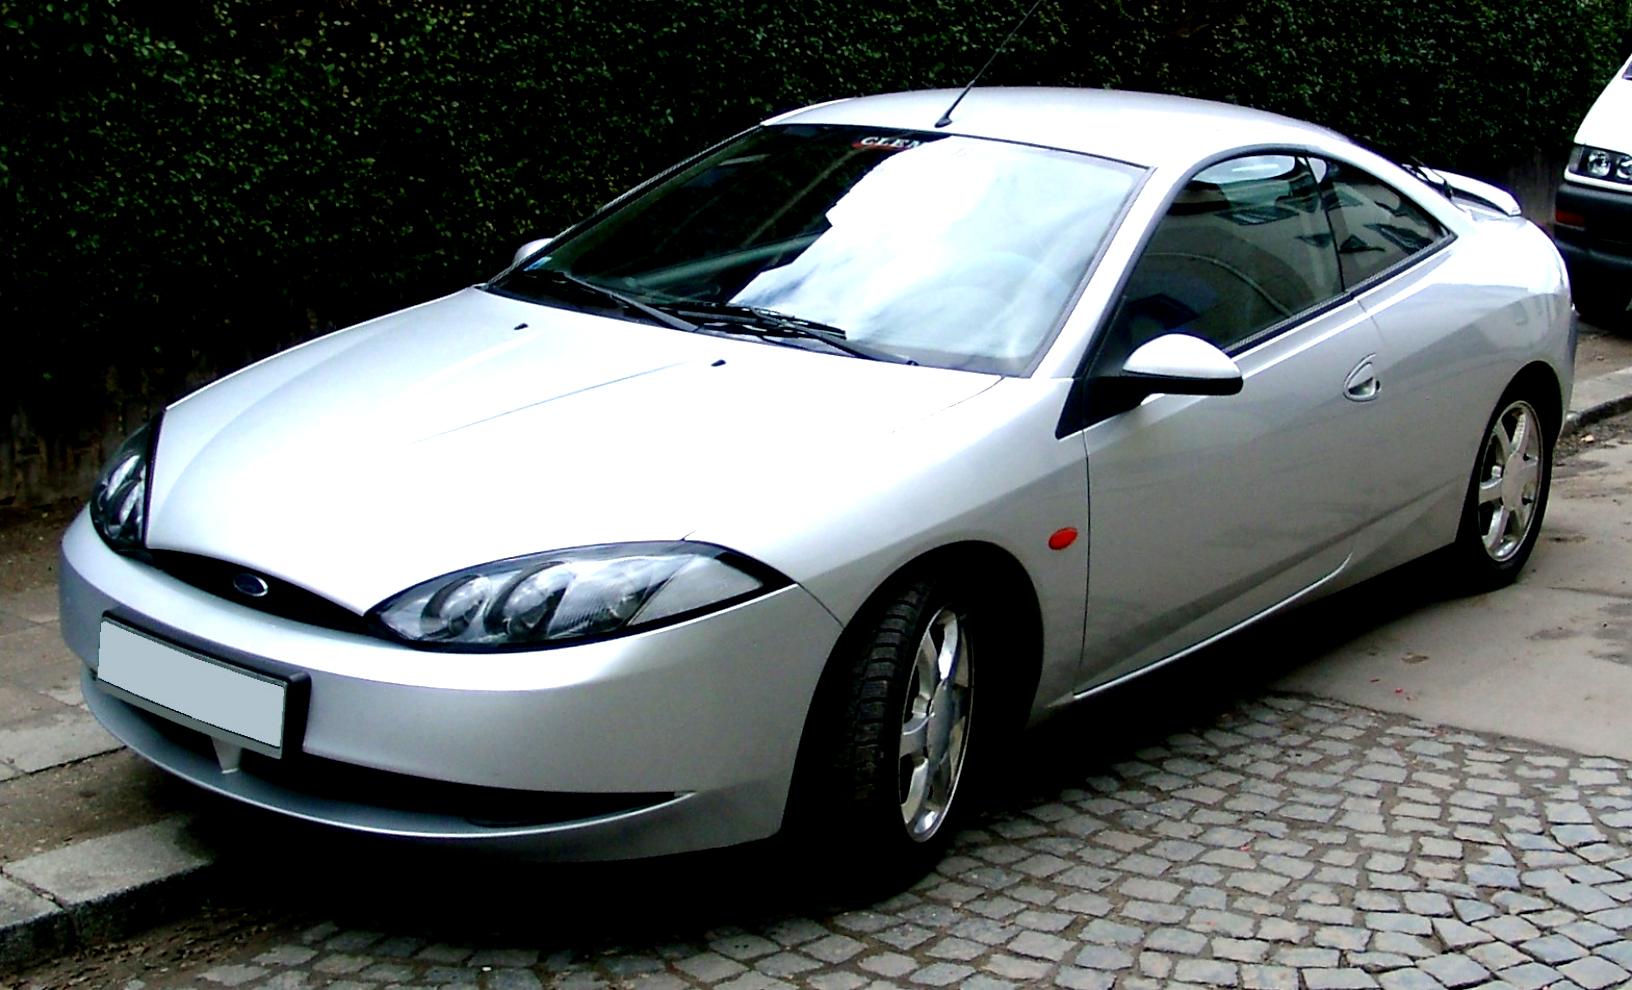 Ford Cougar 1998 #2